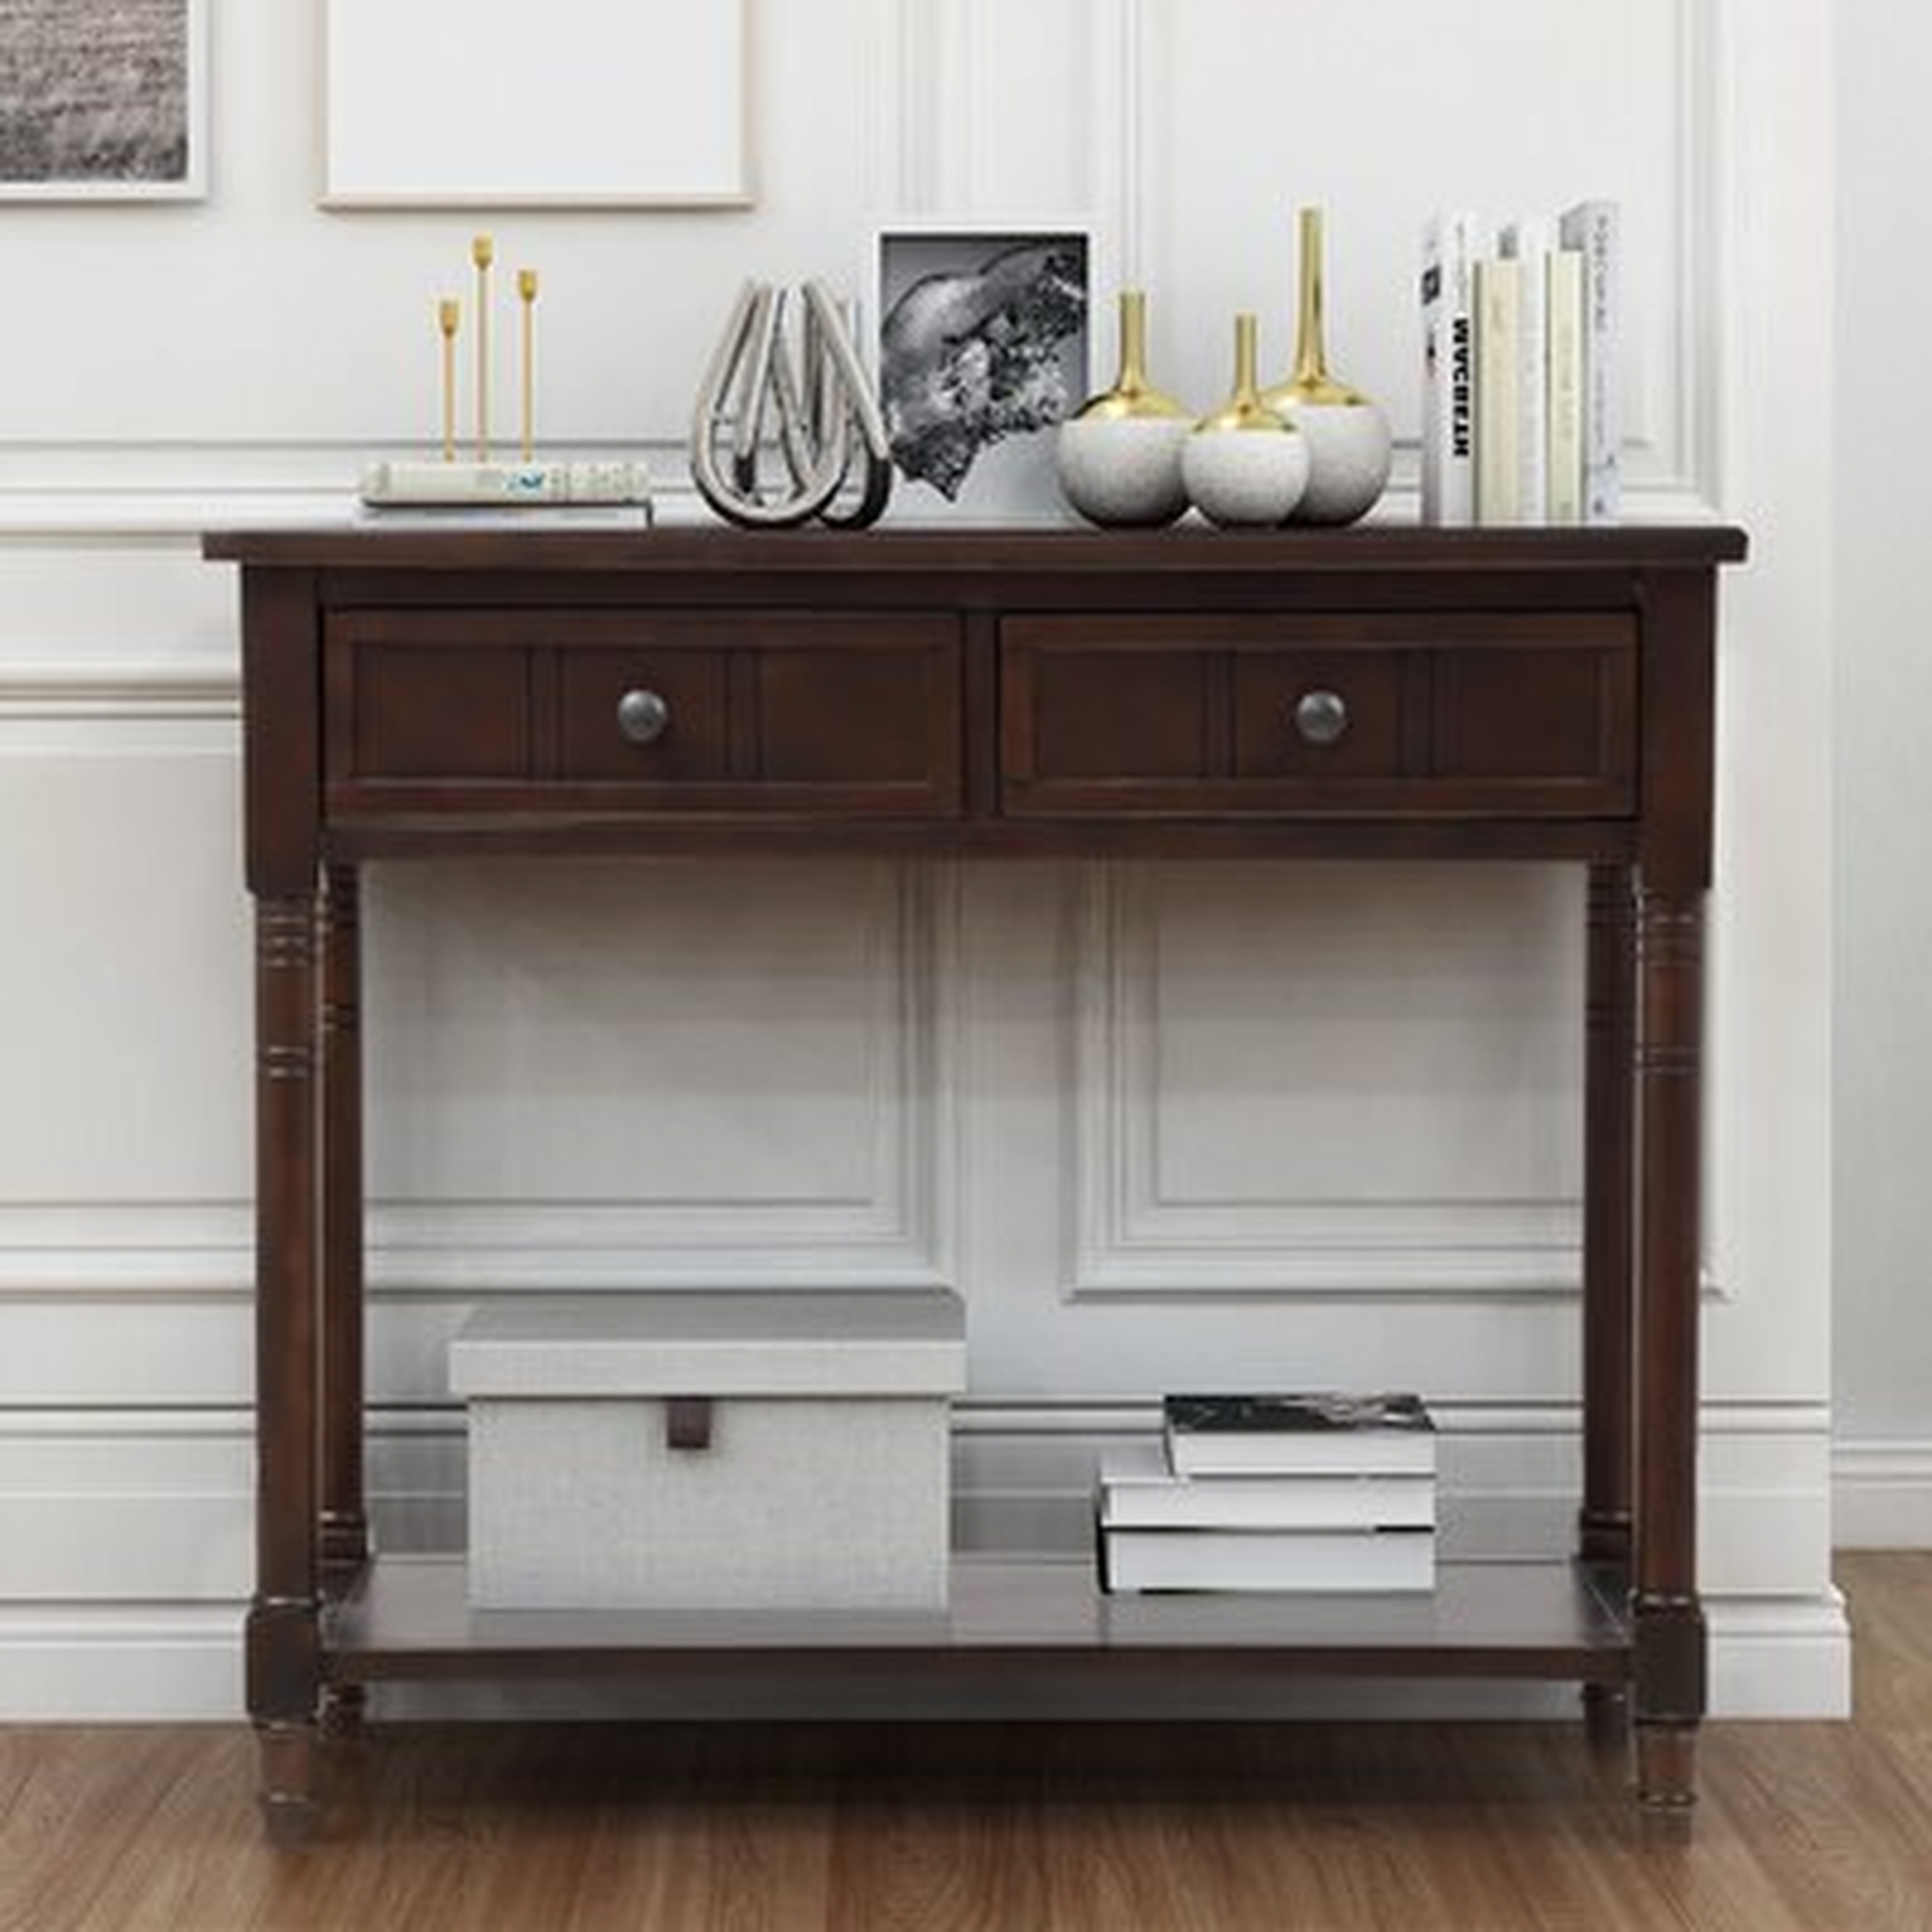 Daisy Series Console Table Traditional Design With Two Drawers And Bottom Shelf Acacia Mangium (Ivory White) - Wayfair